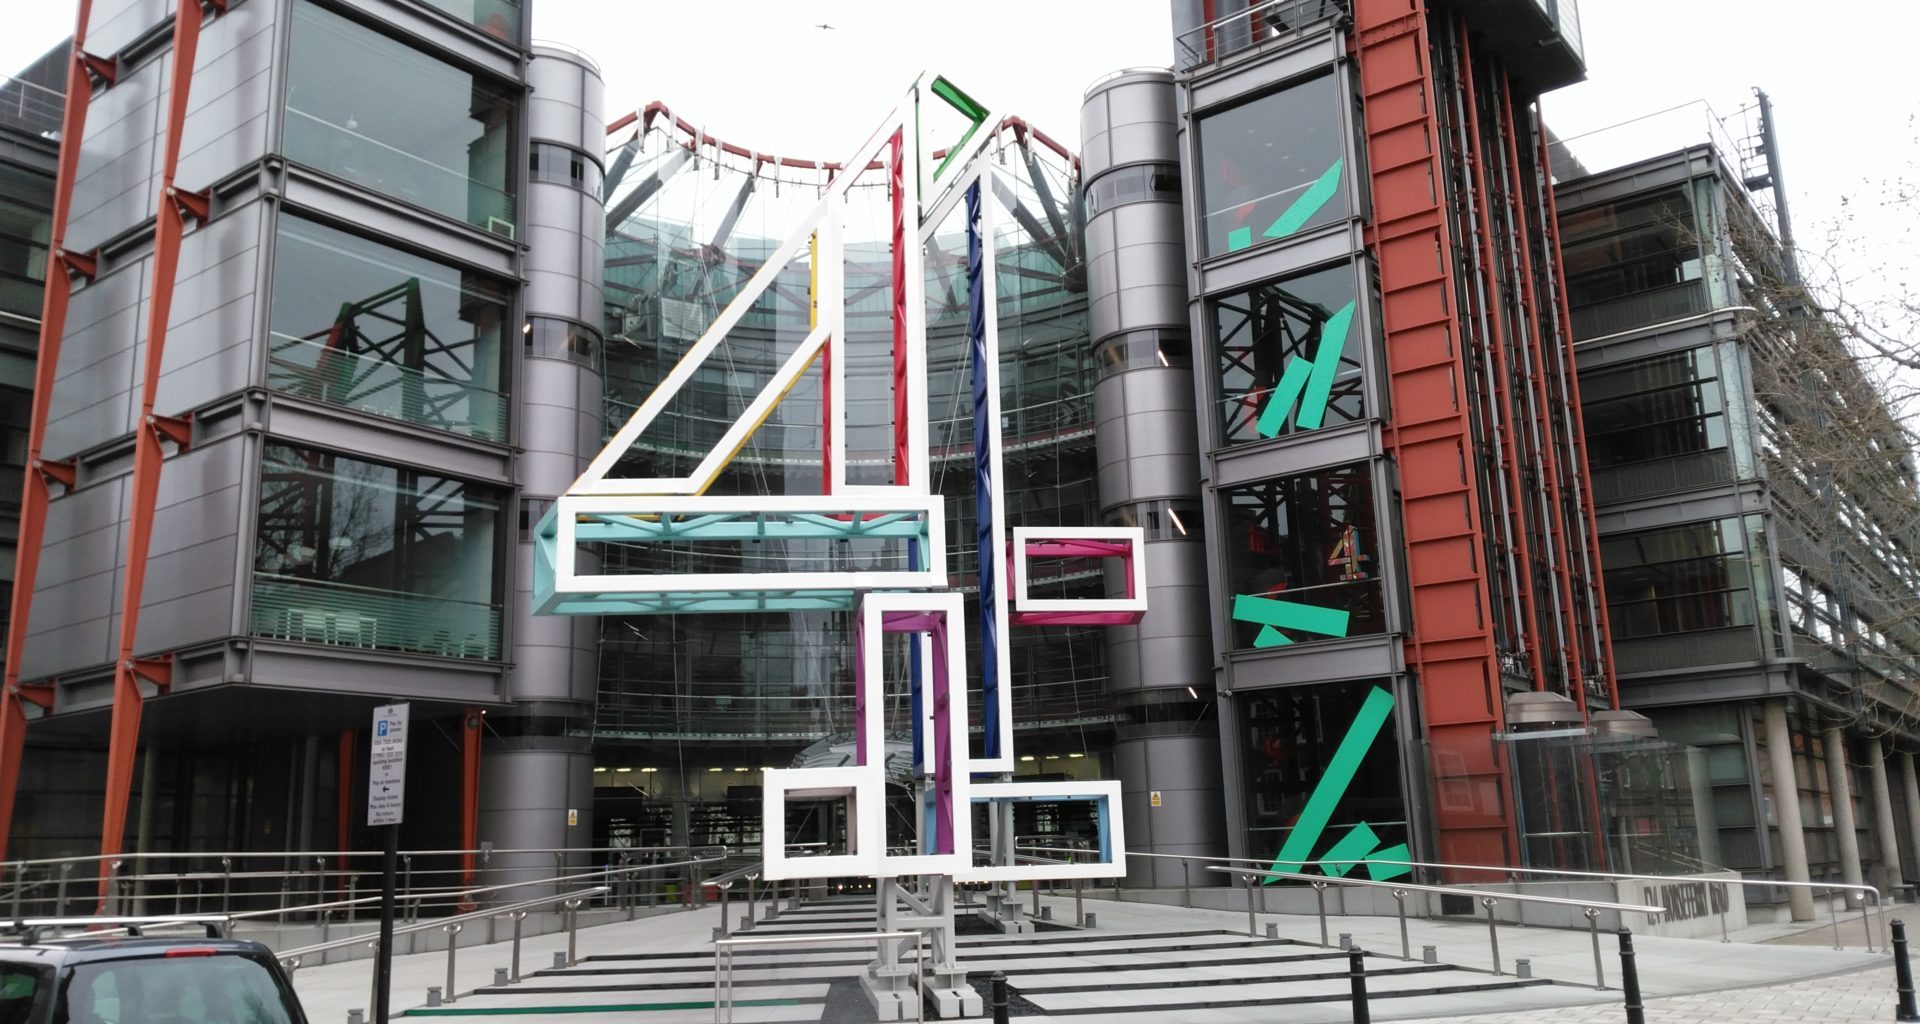 Claim Channel 4 is funded by taxpayers is False 4